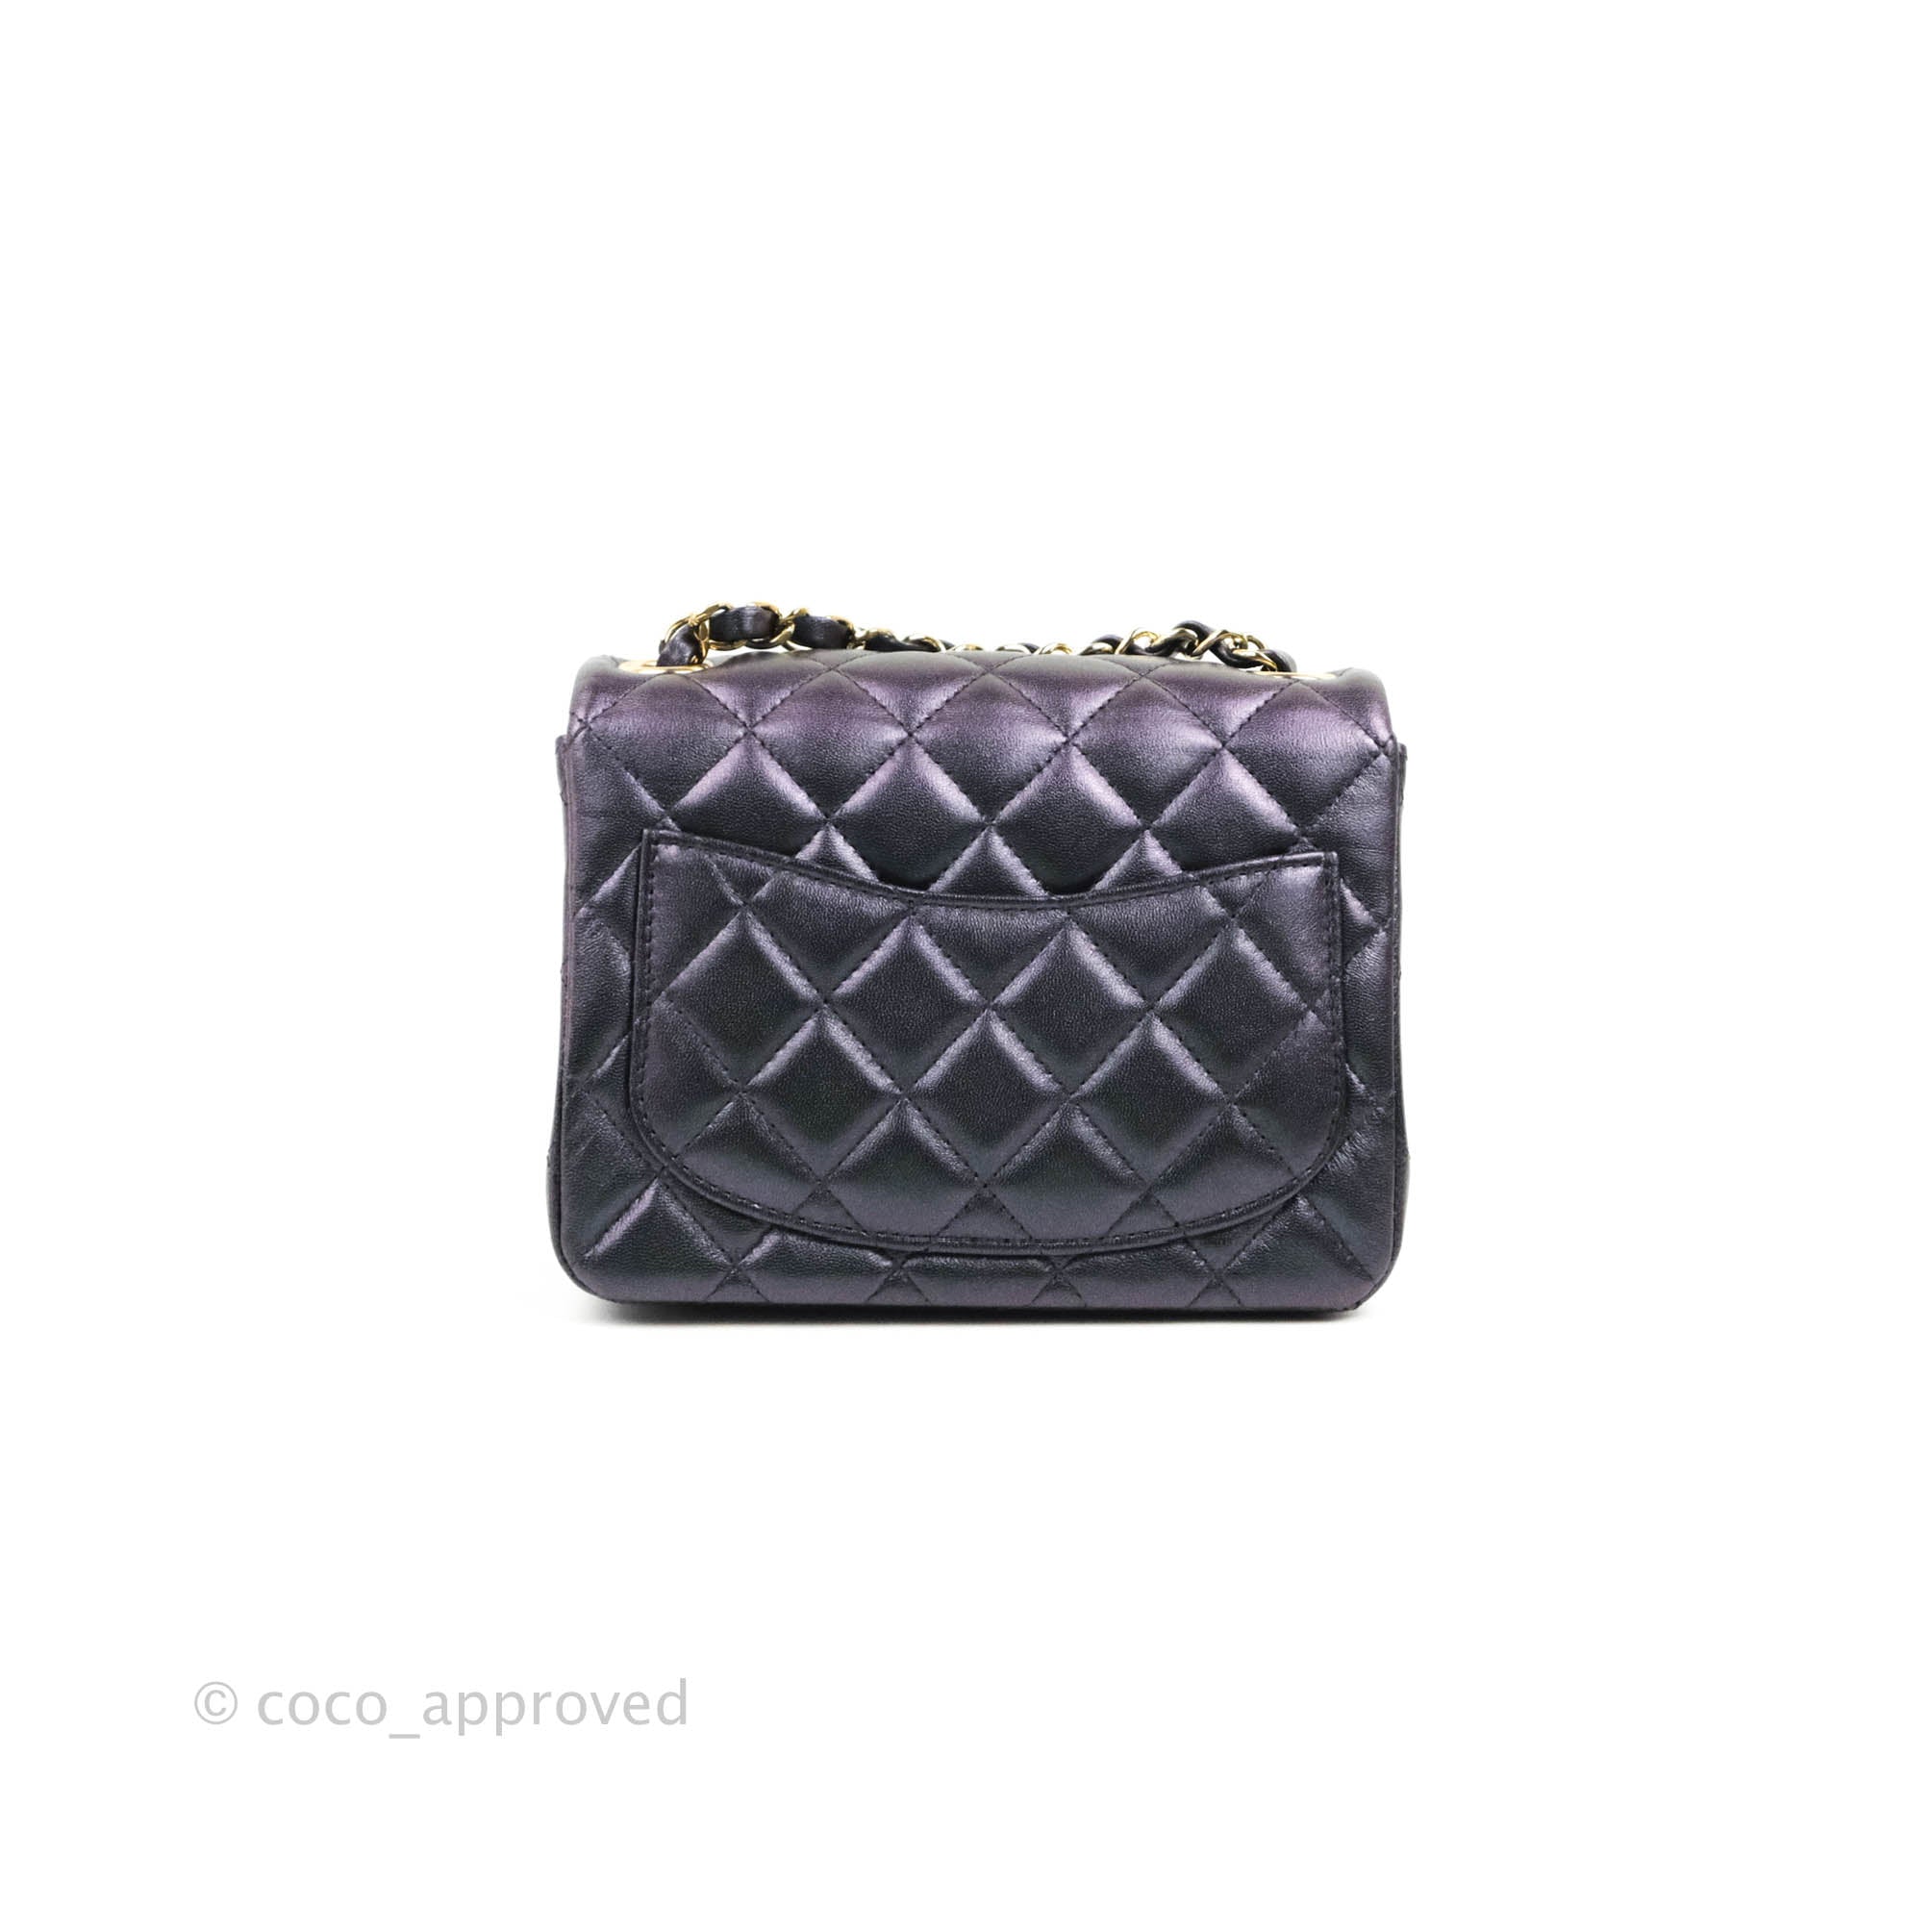 Chanel Black Iridescent Lambskin Crystal Quilted Clutch